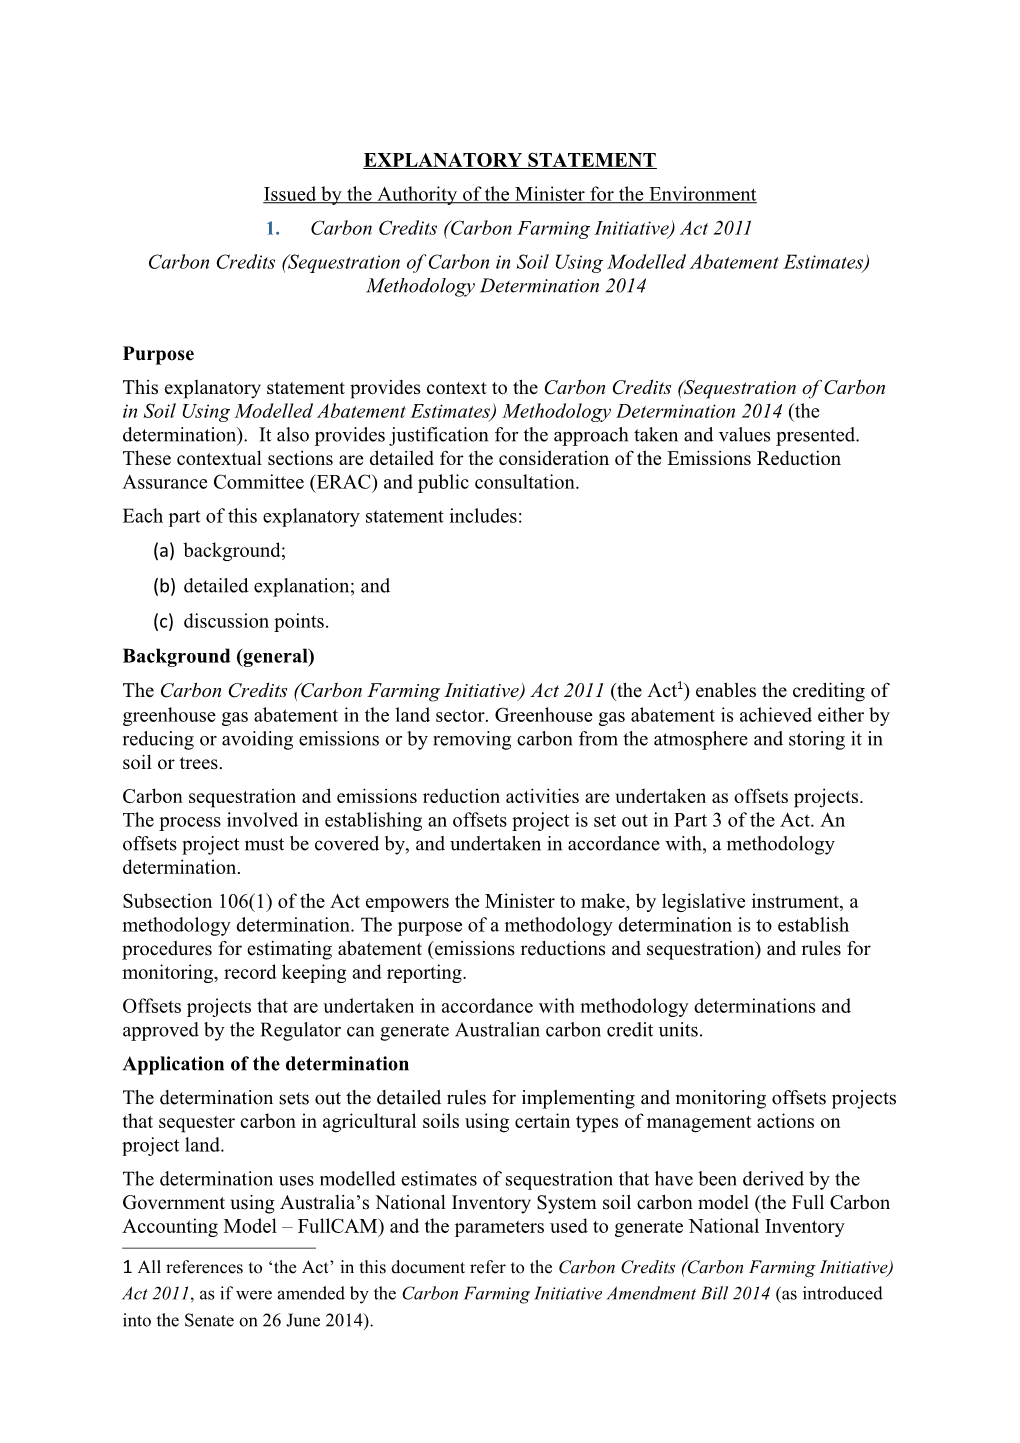 Explanatory Statement - Carbon Credits (Sequestration of Carbon in Soil Using Modelled